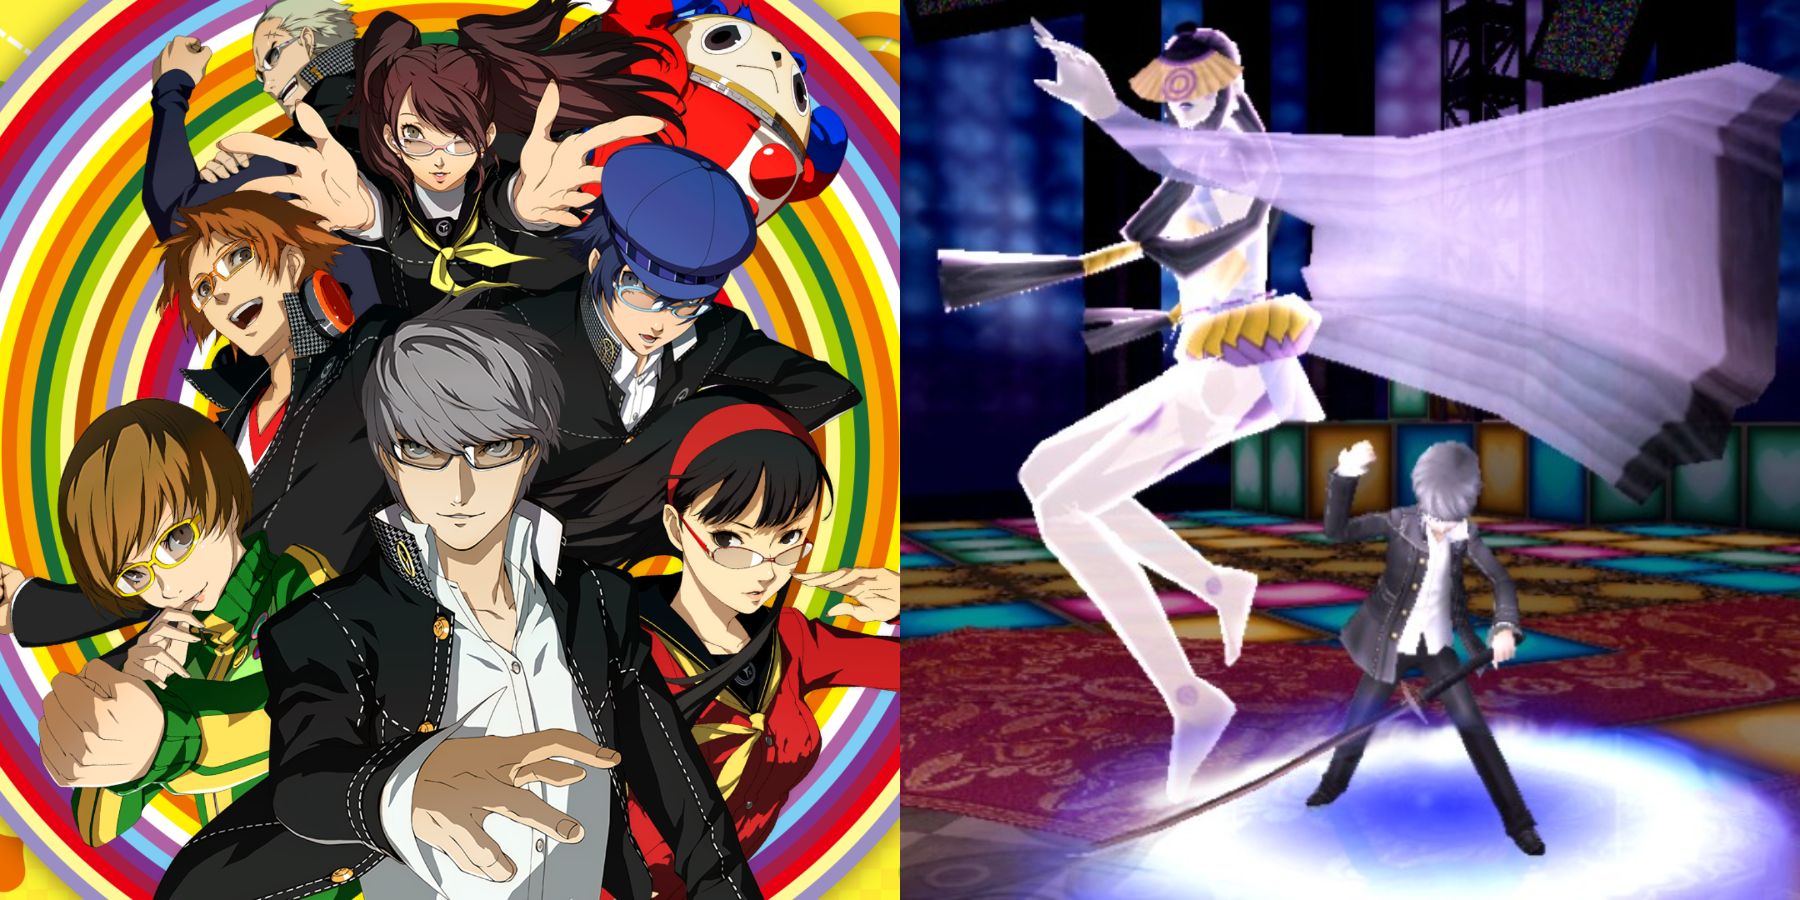 Persona 4 Golden - art and persona in battle